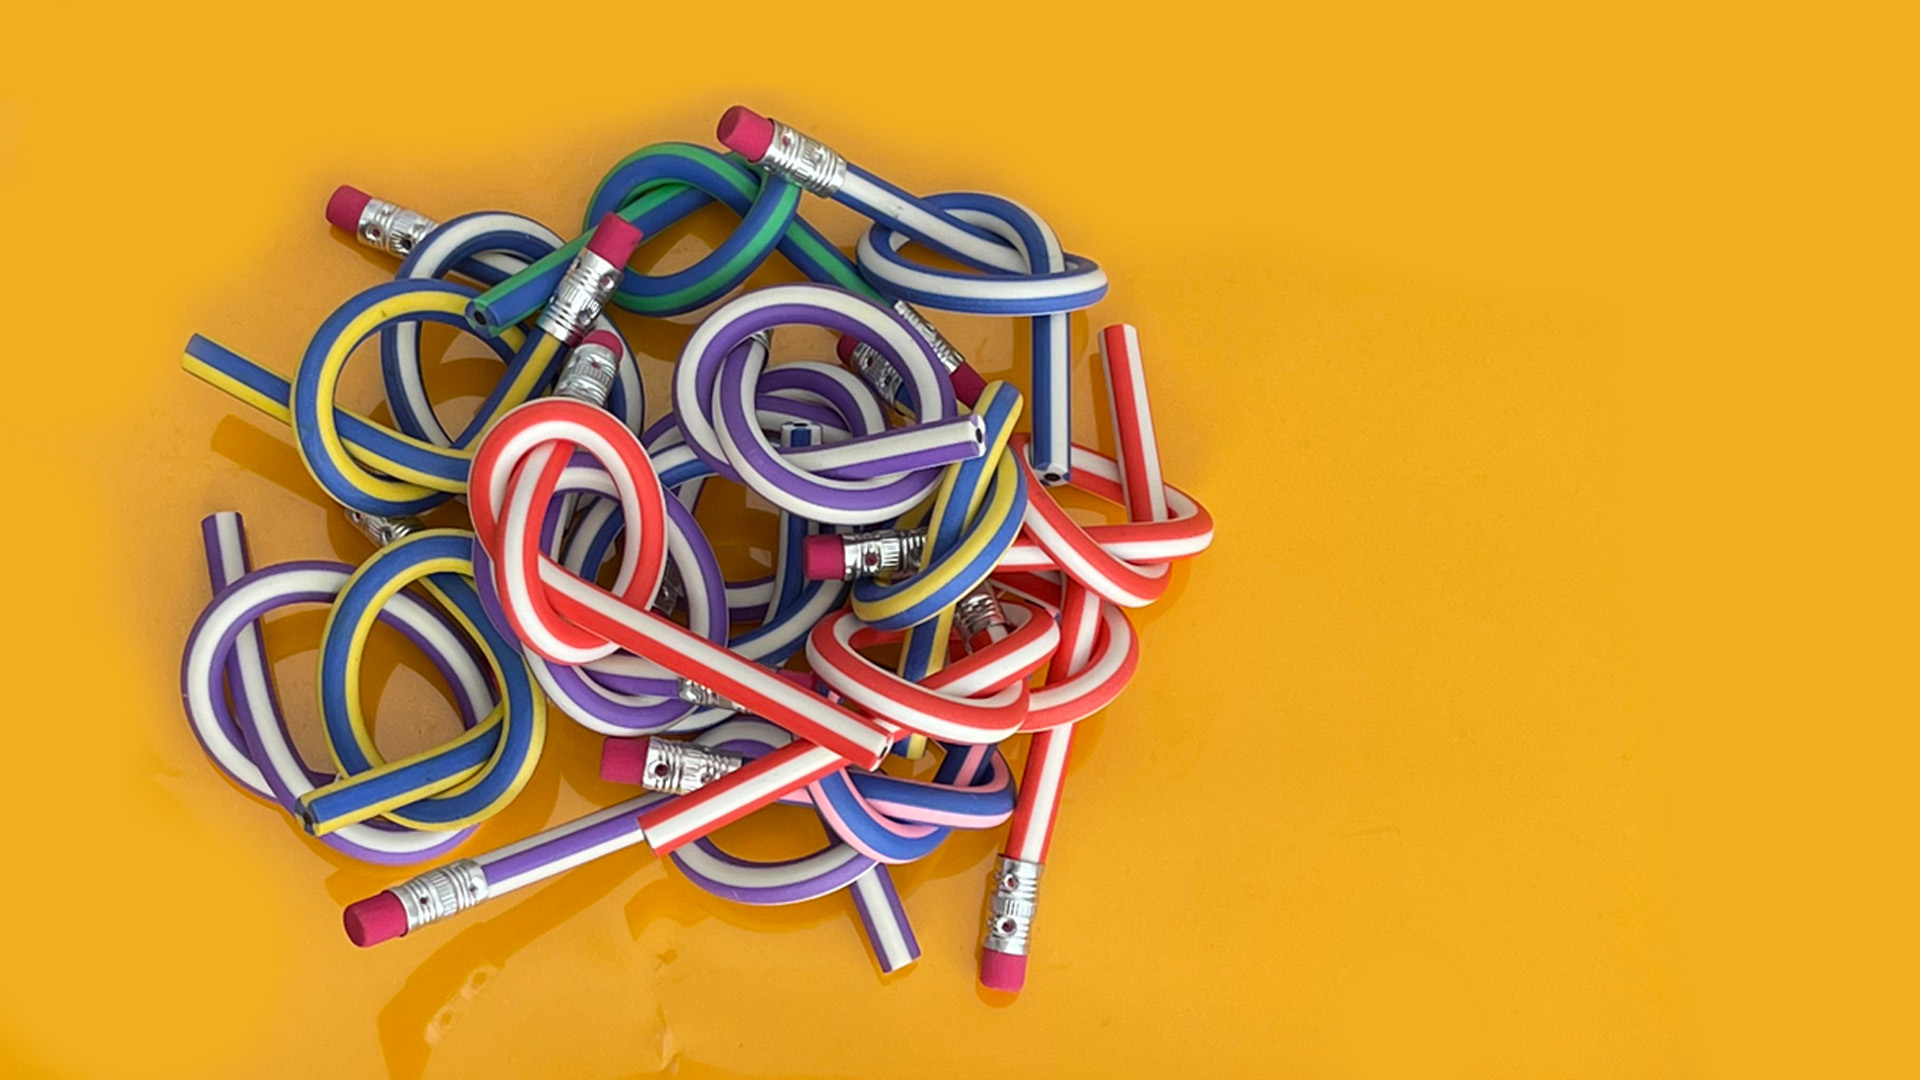 This is a header image of a pile of pencils tied into knots.